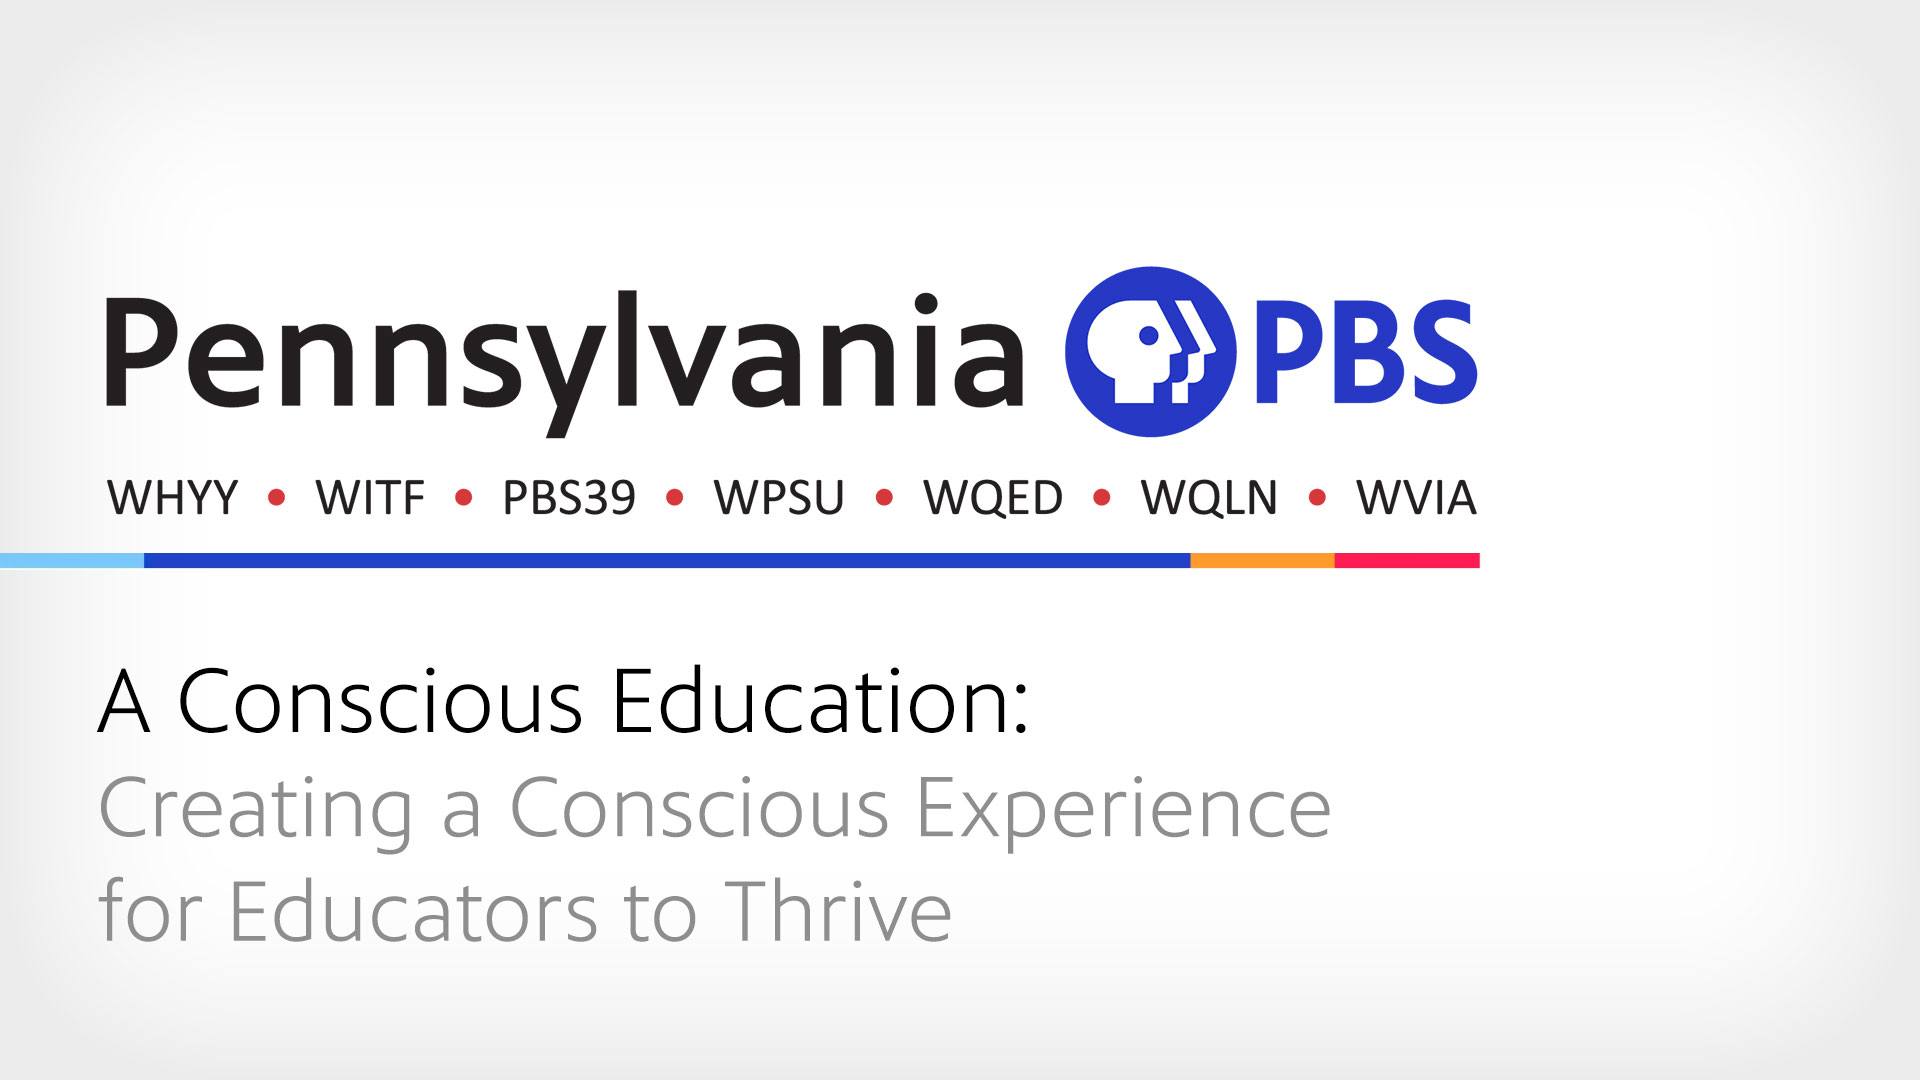 A Conscious Education: Creating a Conscious Experience for Educators to Thrive 